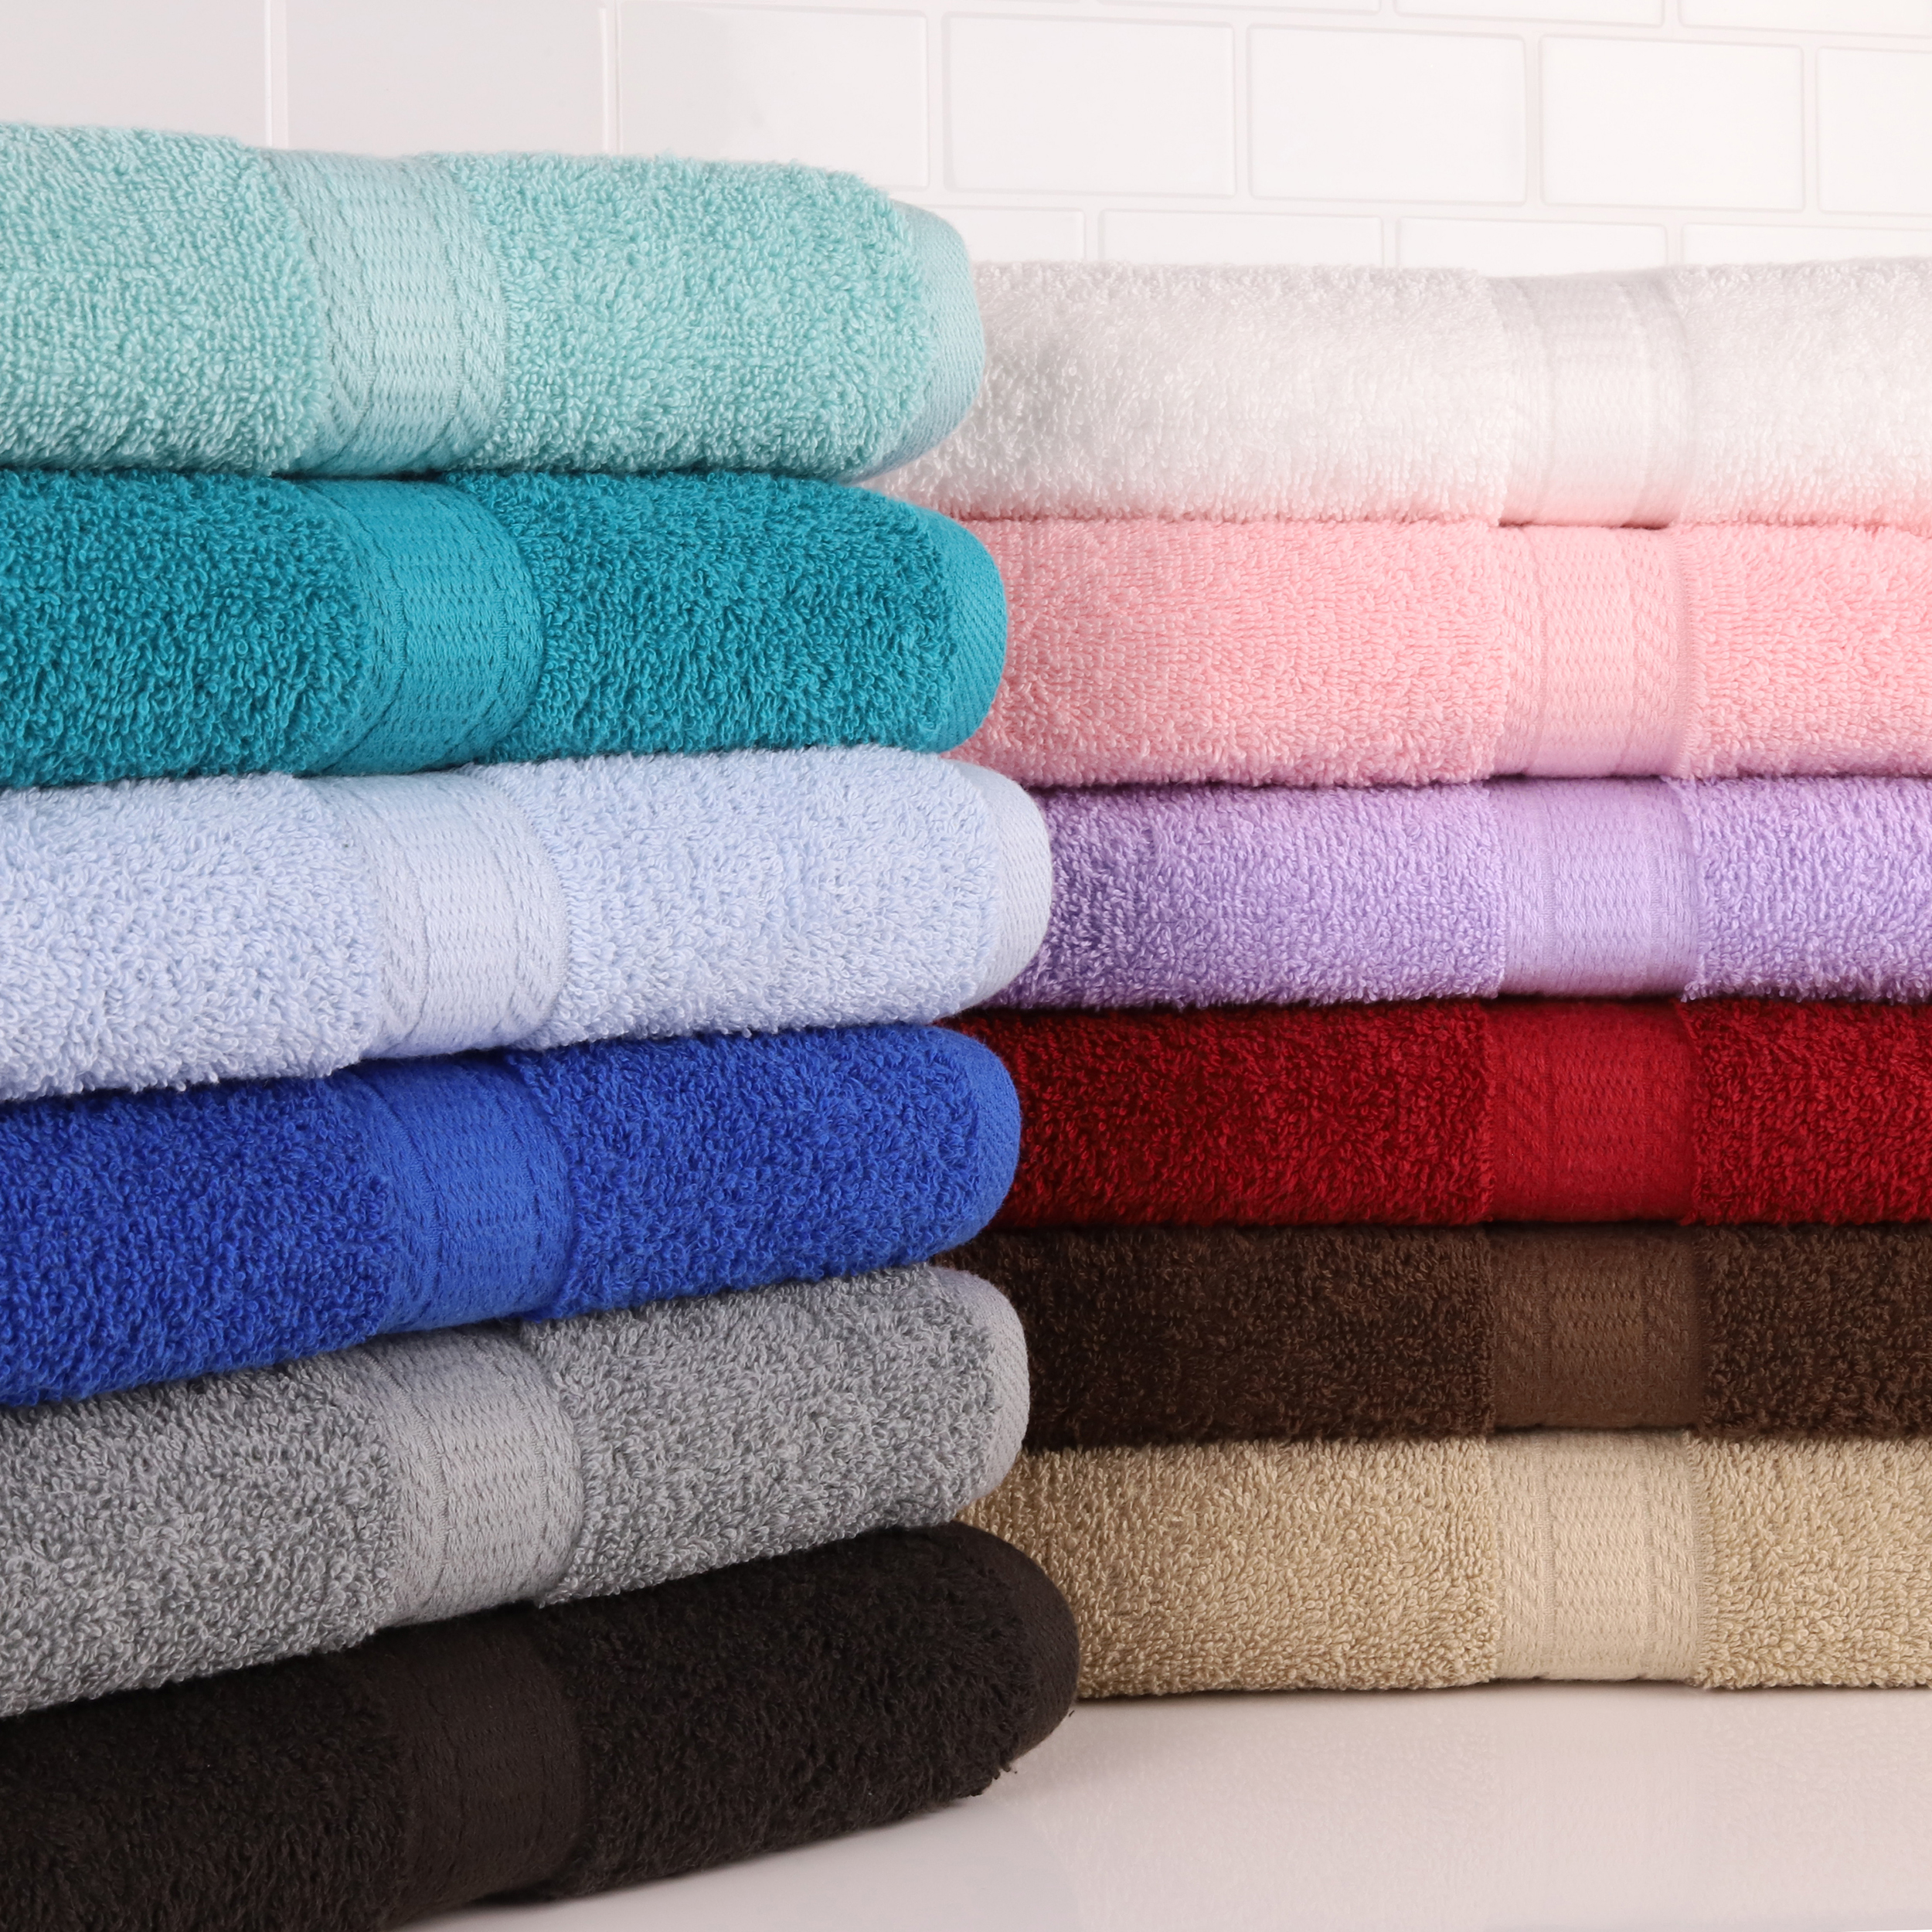 Mainstays Basic Solid 18-Piece Bath Towel Set Collection, White - image 5 of 10